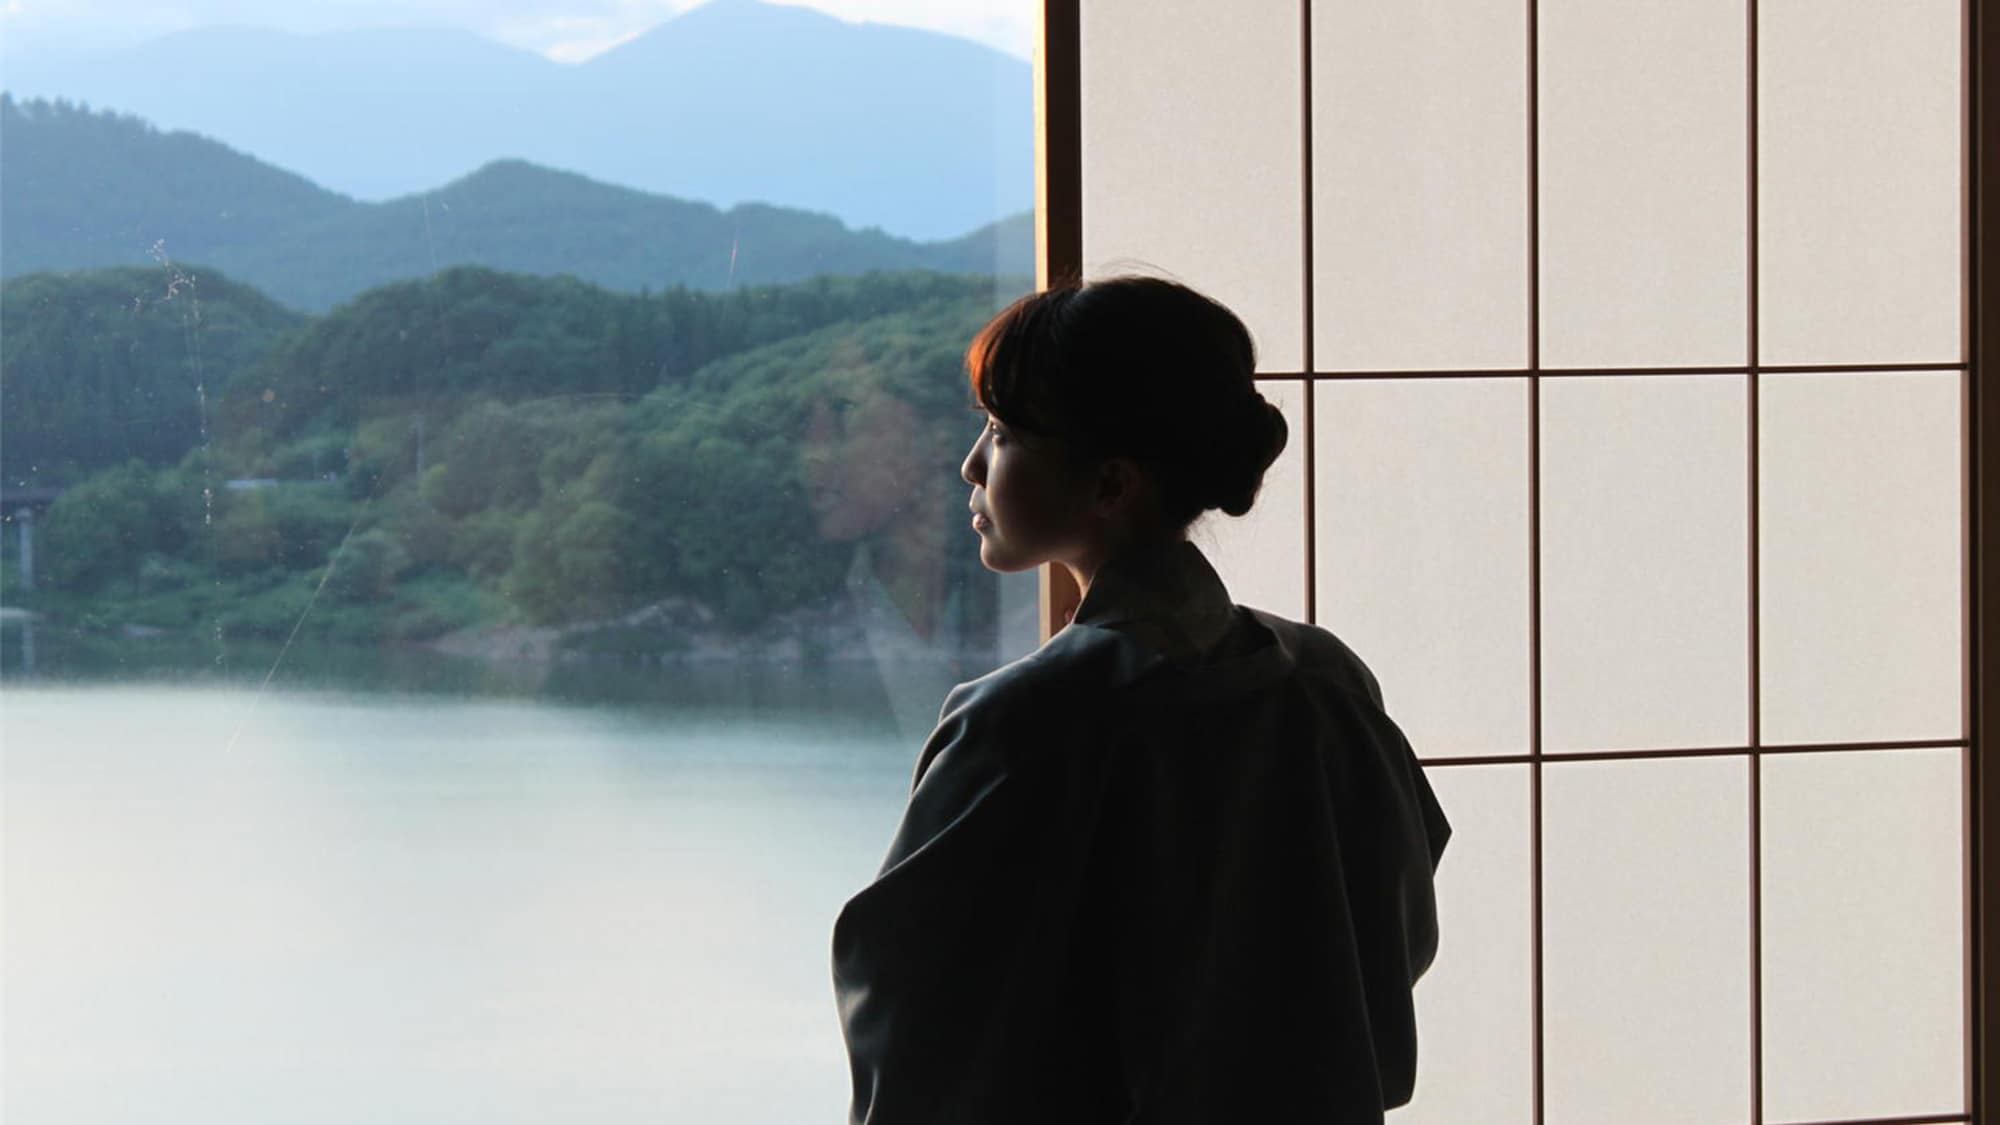 You can overlook Lake Gosho from all rooms. Please enjoy the colors of the seasons.